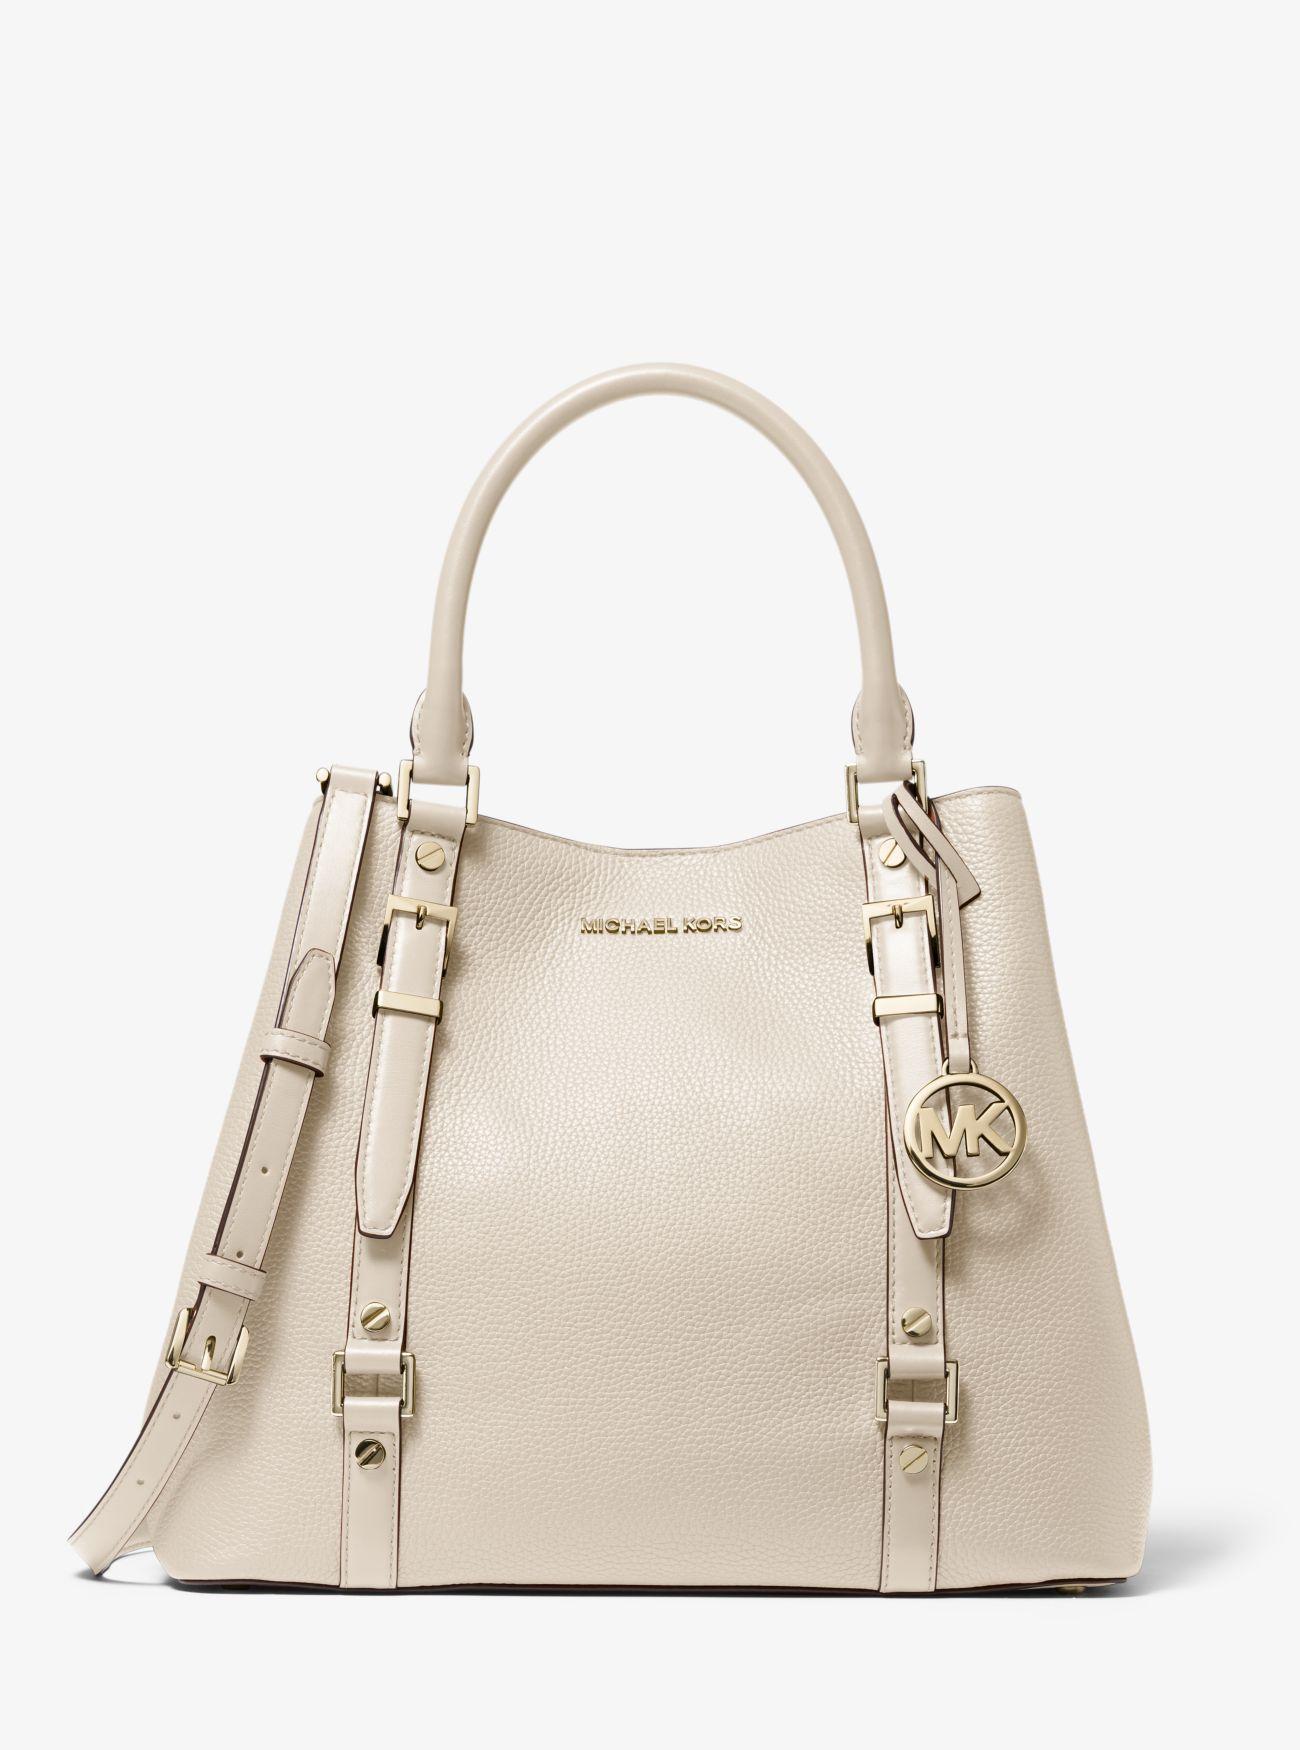 MICHAEL Michael Kors Bedford Legacy Large Pebbled Leather Tote Bag in Natural - Lyst